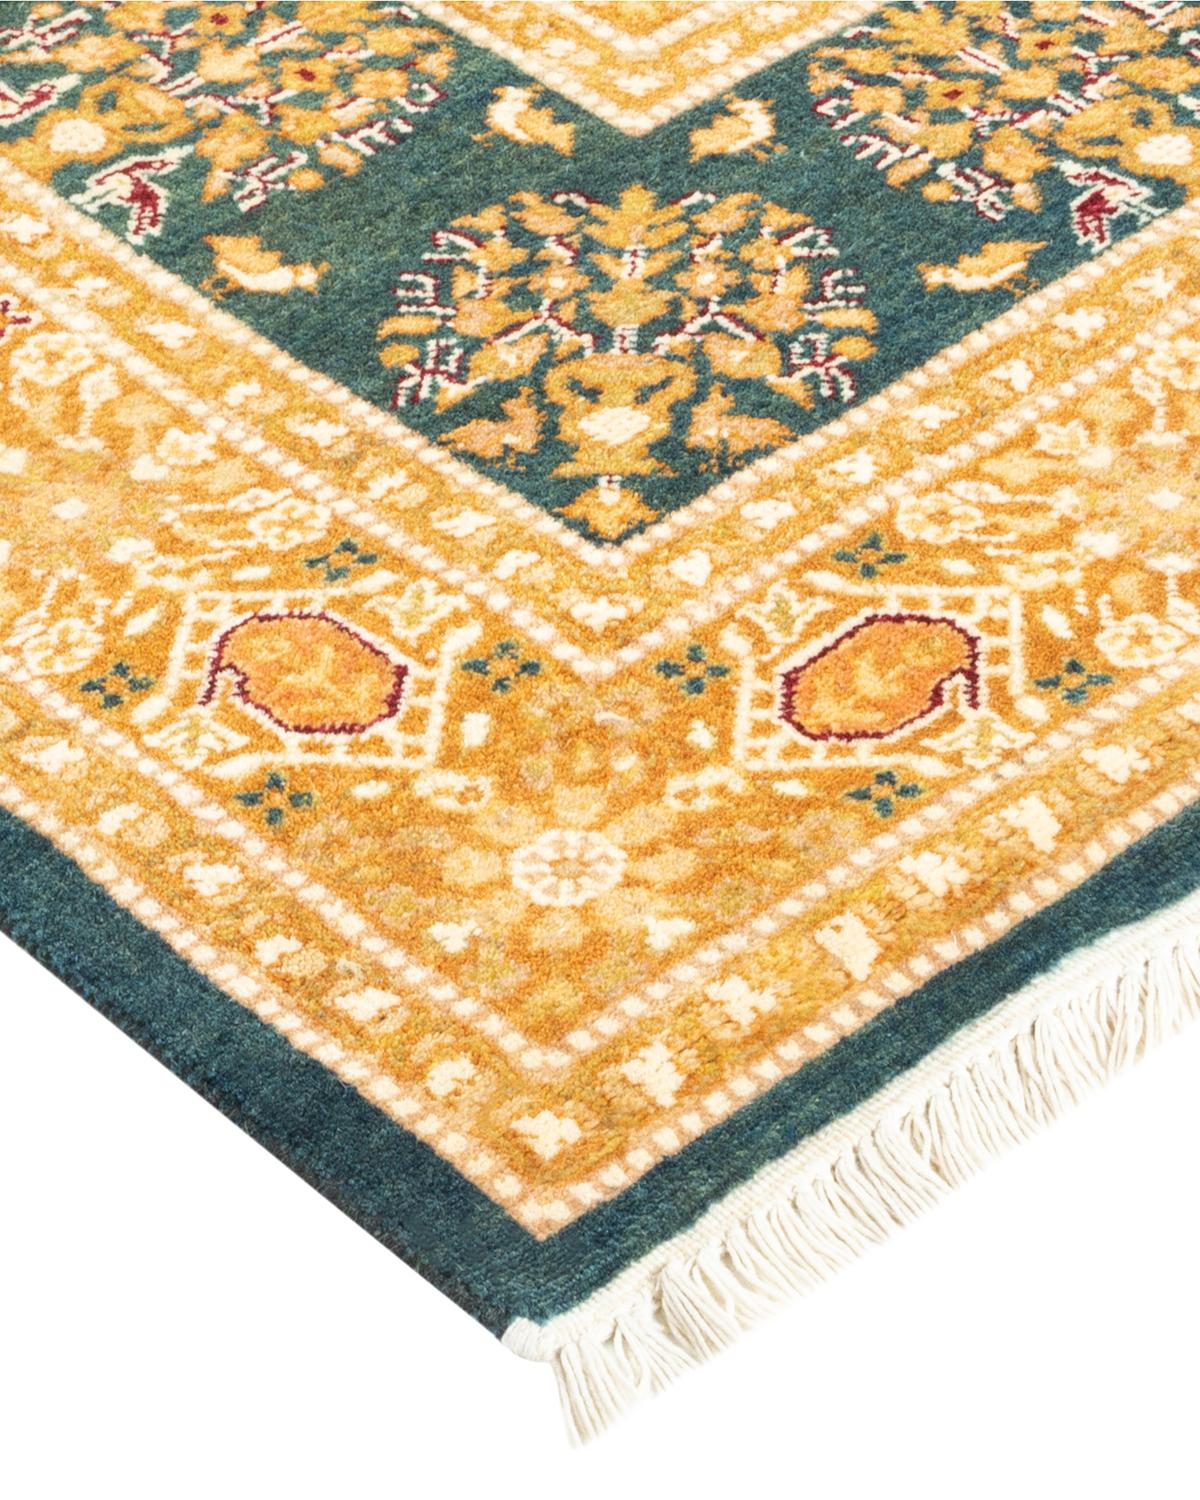 With understated palettes and allover designs, the rugs in the Mogul Collection will bring timeless sophistication to any room. Influenced by a spectrum of Turkish, Indian, and Persian designs, the artisans who handweave these wool rugs imbue